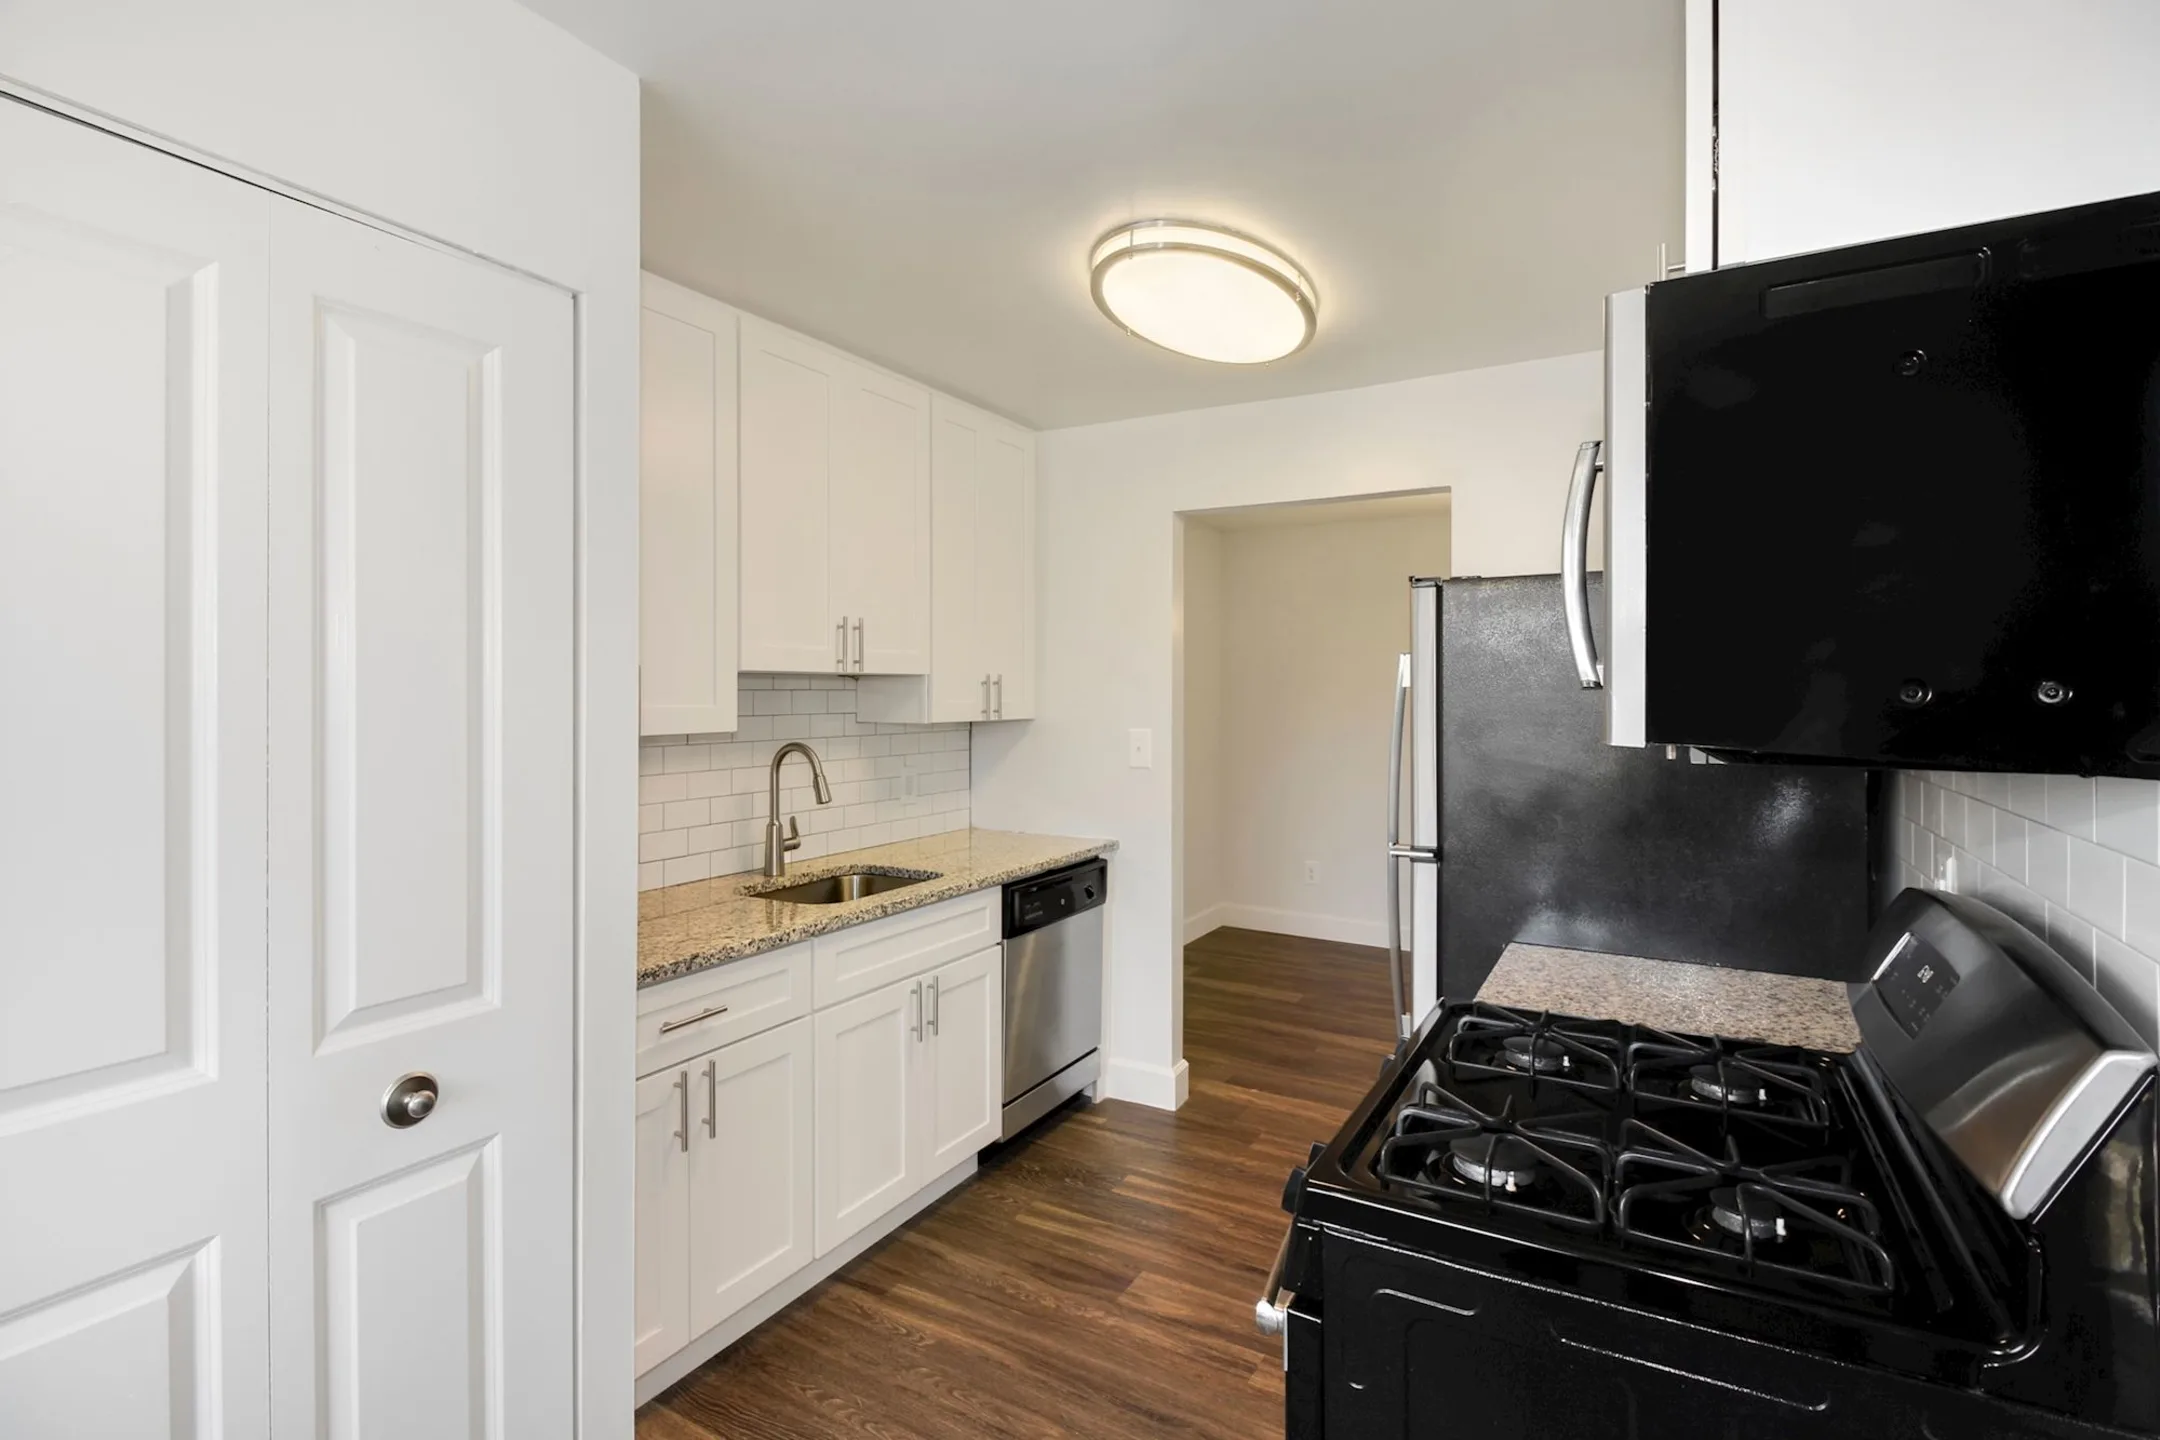 Kitchen - Satyr Hill Apartments - Parkville, MD